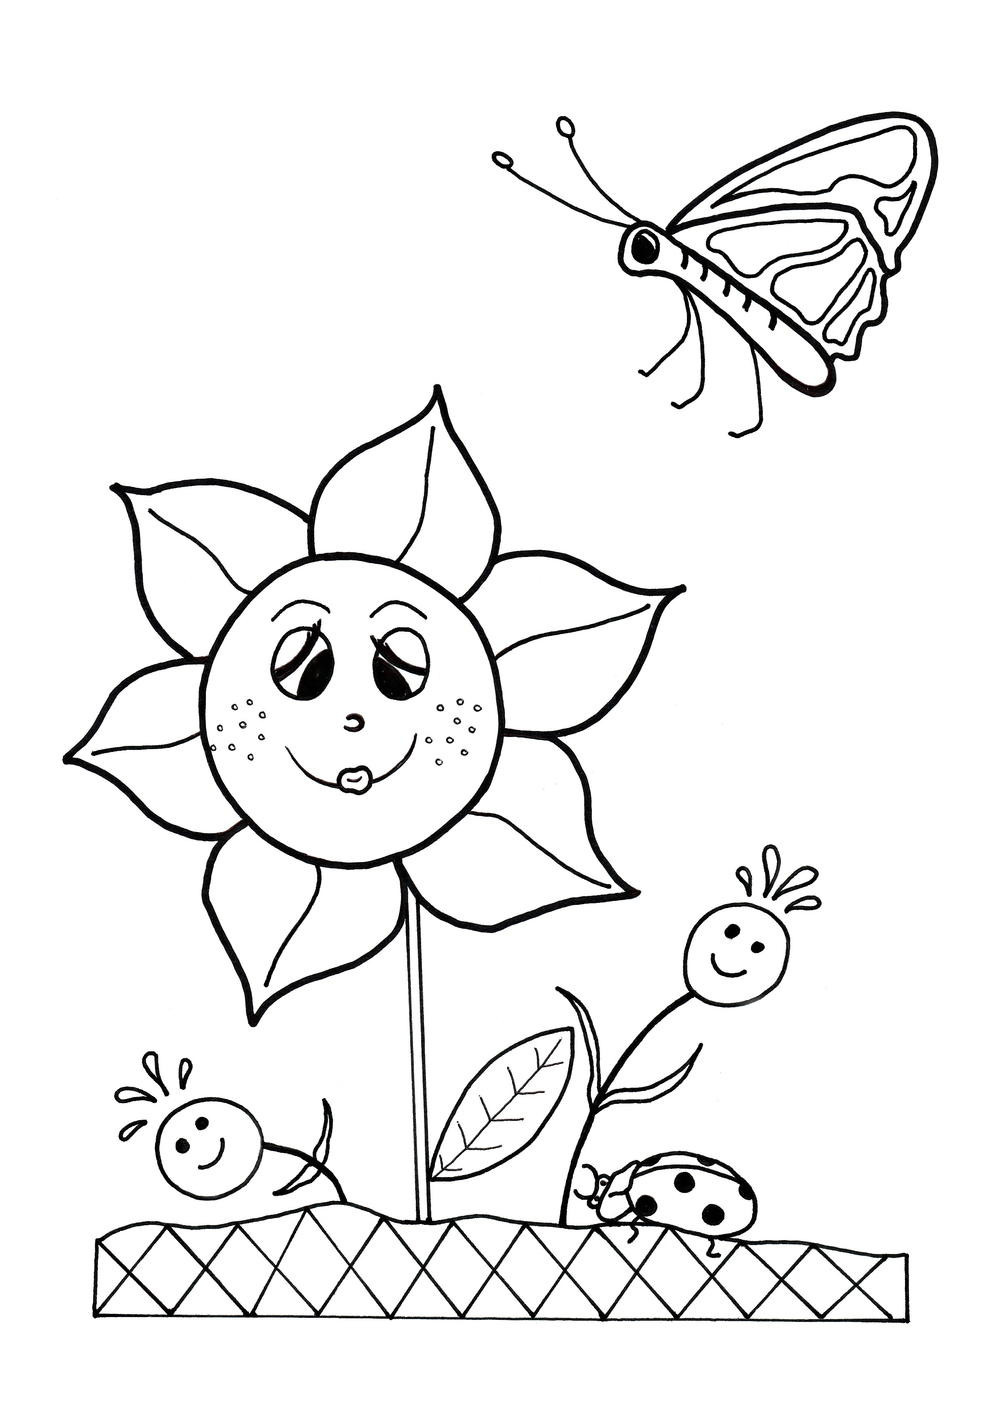 Free Coloring Pages For Girls Flowers
 Dancing Flowers Spring Coloring Sheet